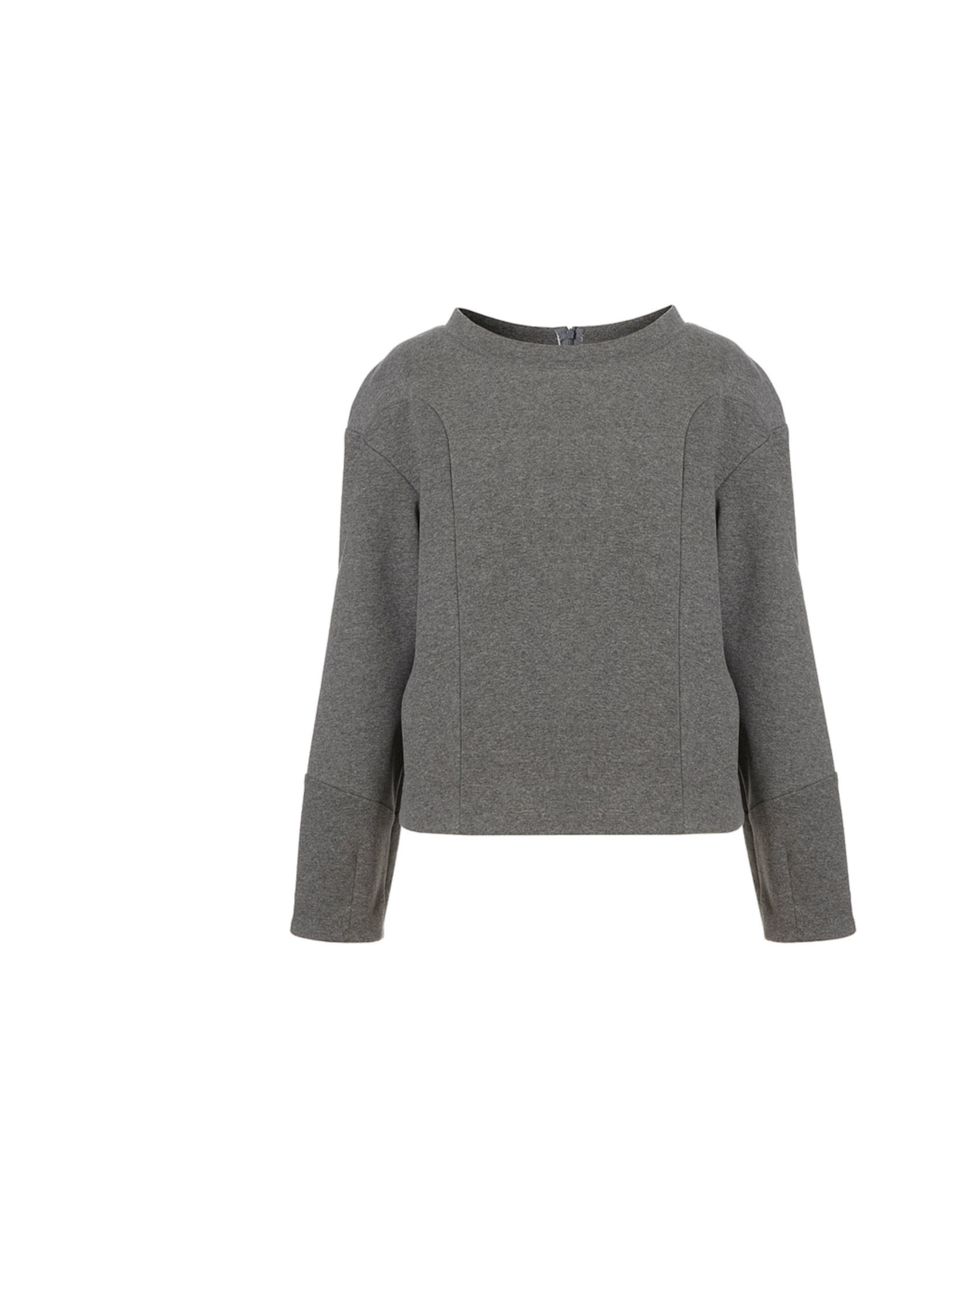 <p>Dressing for the sports luxe trend is far easier than exercise. Throw on this scuba sweater over everything from jeans to pencil skirts Topshop Boutique neoprene sweater, £60</p><p><a href="http://shopping.elleuk.com/browse?fts=topshop+boutique+neopre